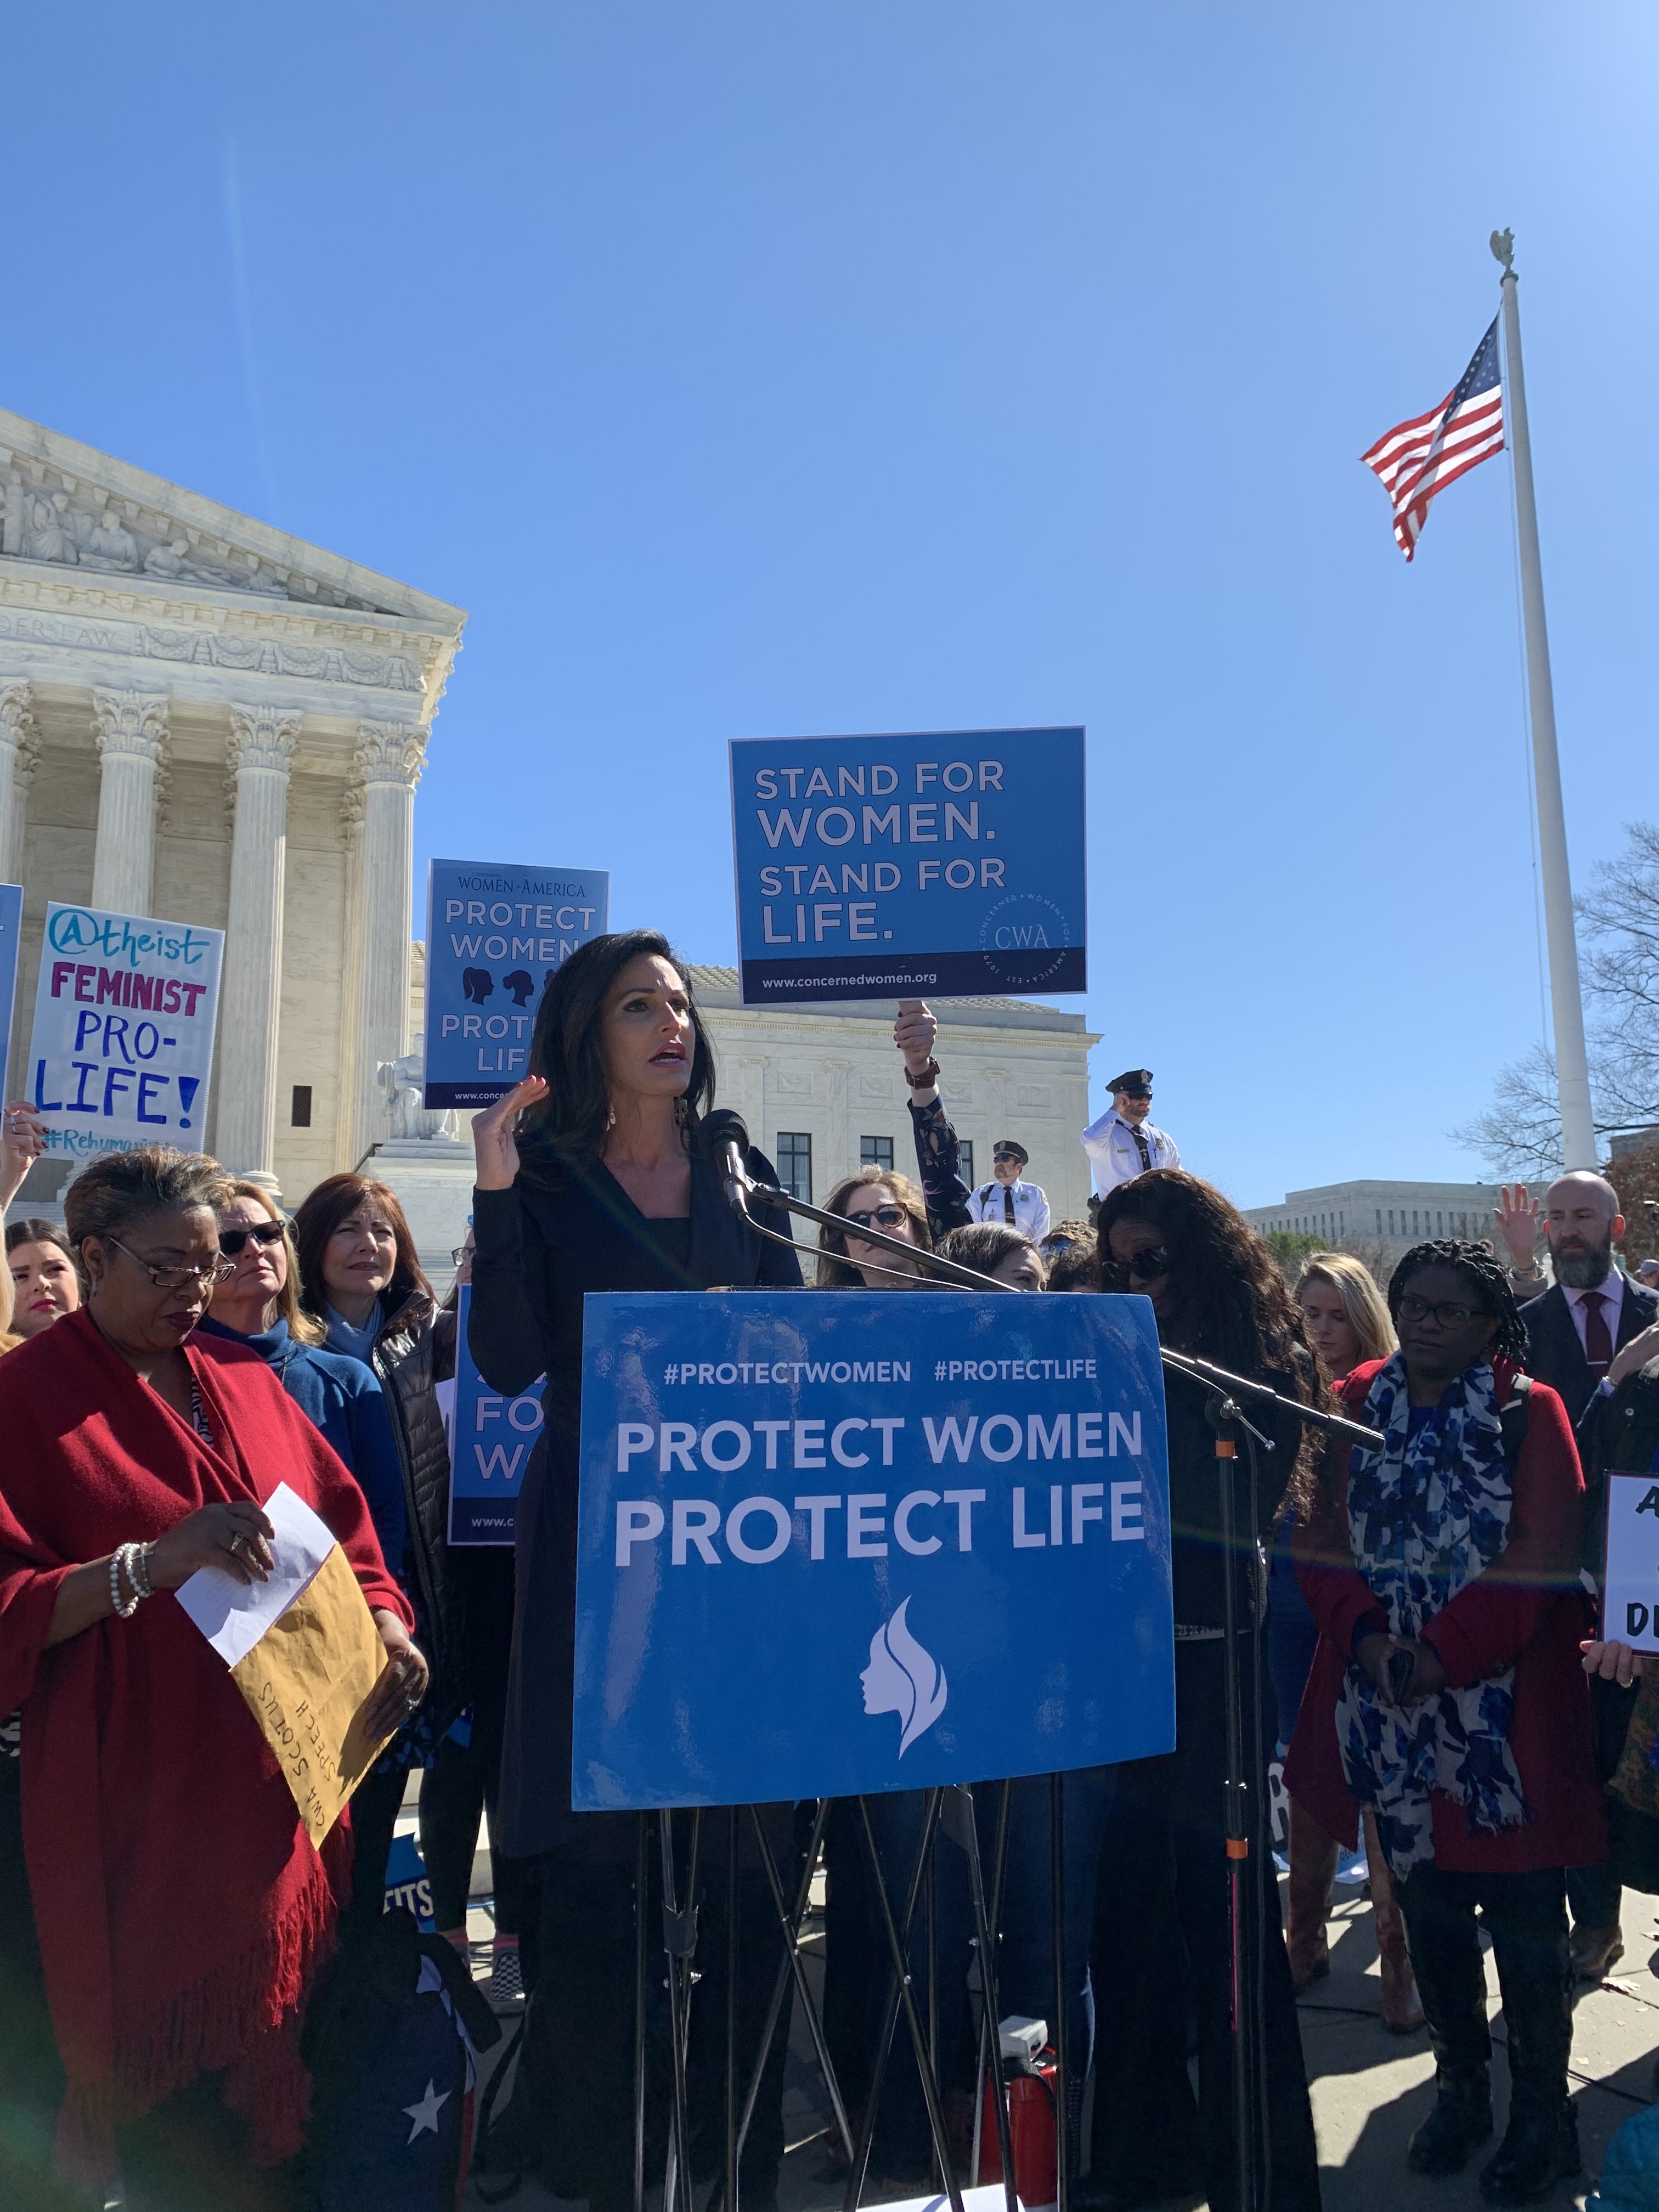 CWA CEO and President Penny Nance speaking at the Protect Women Protect Life rally at the Supreme Court